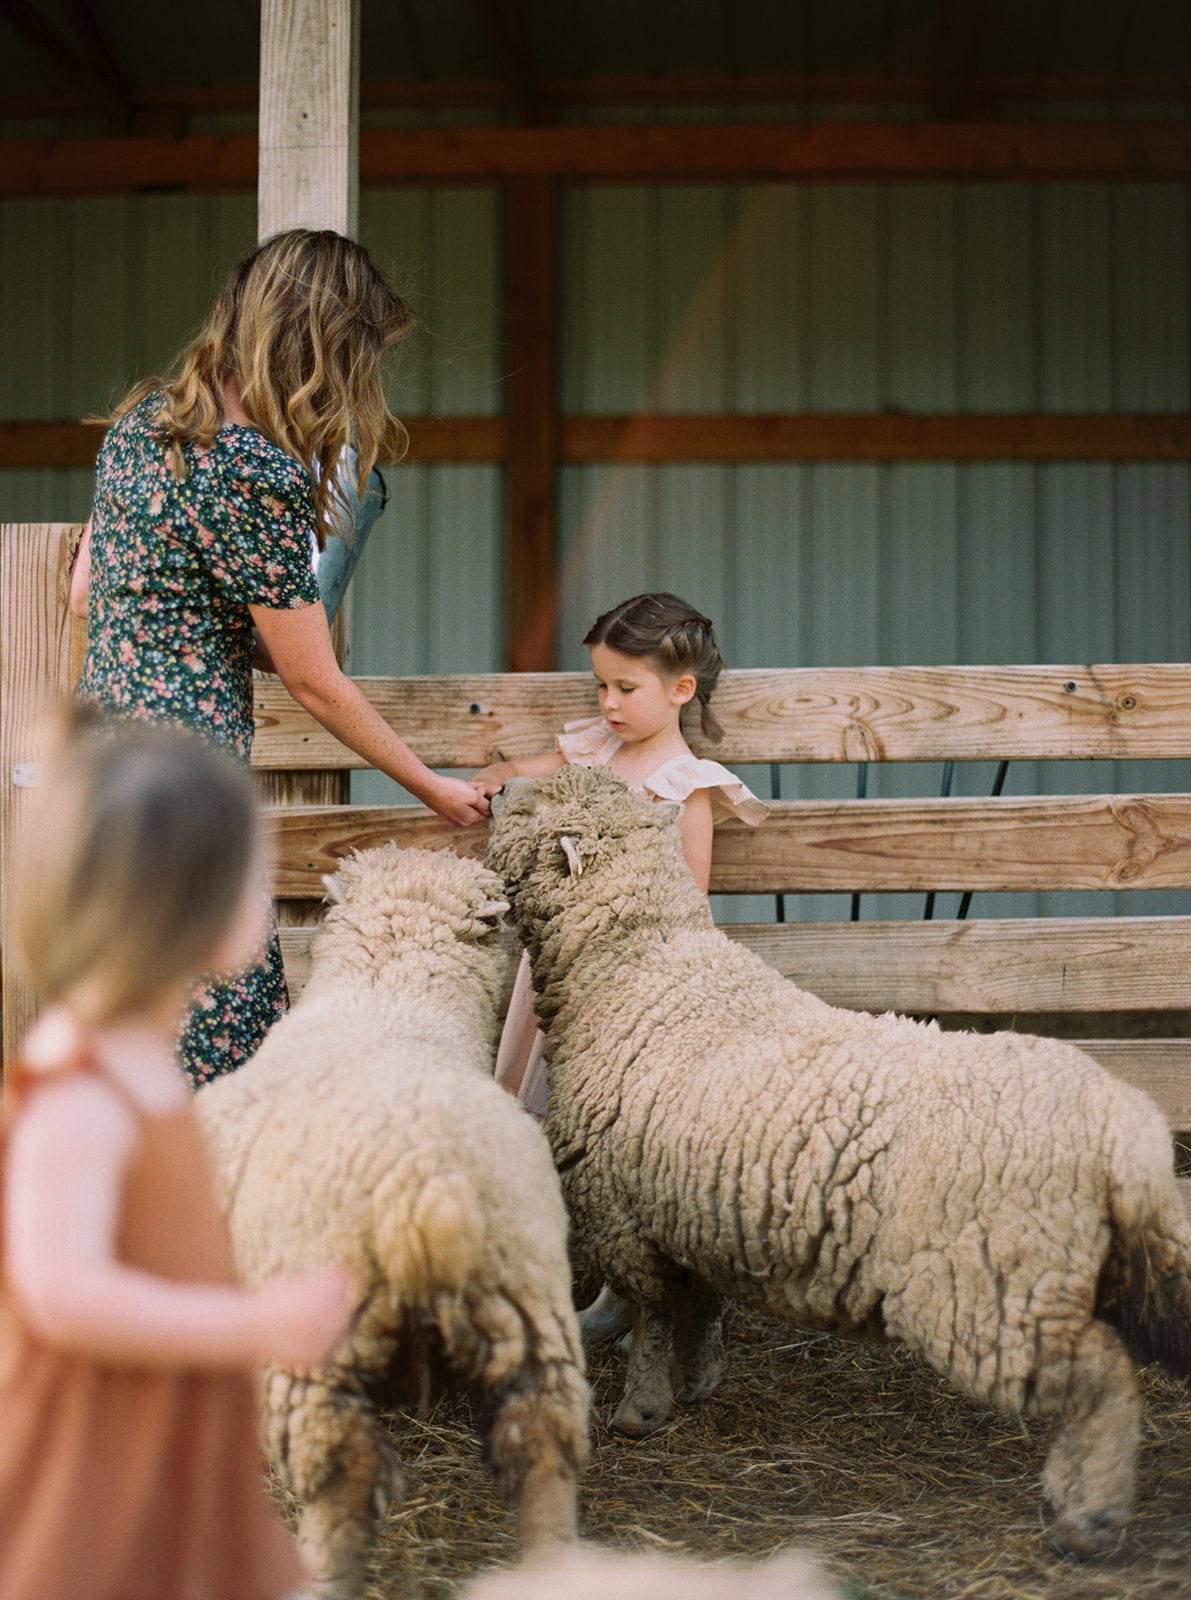 Babydoll Sheep are gentle, and perfect for families with children. Learn more at everlyraine.com